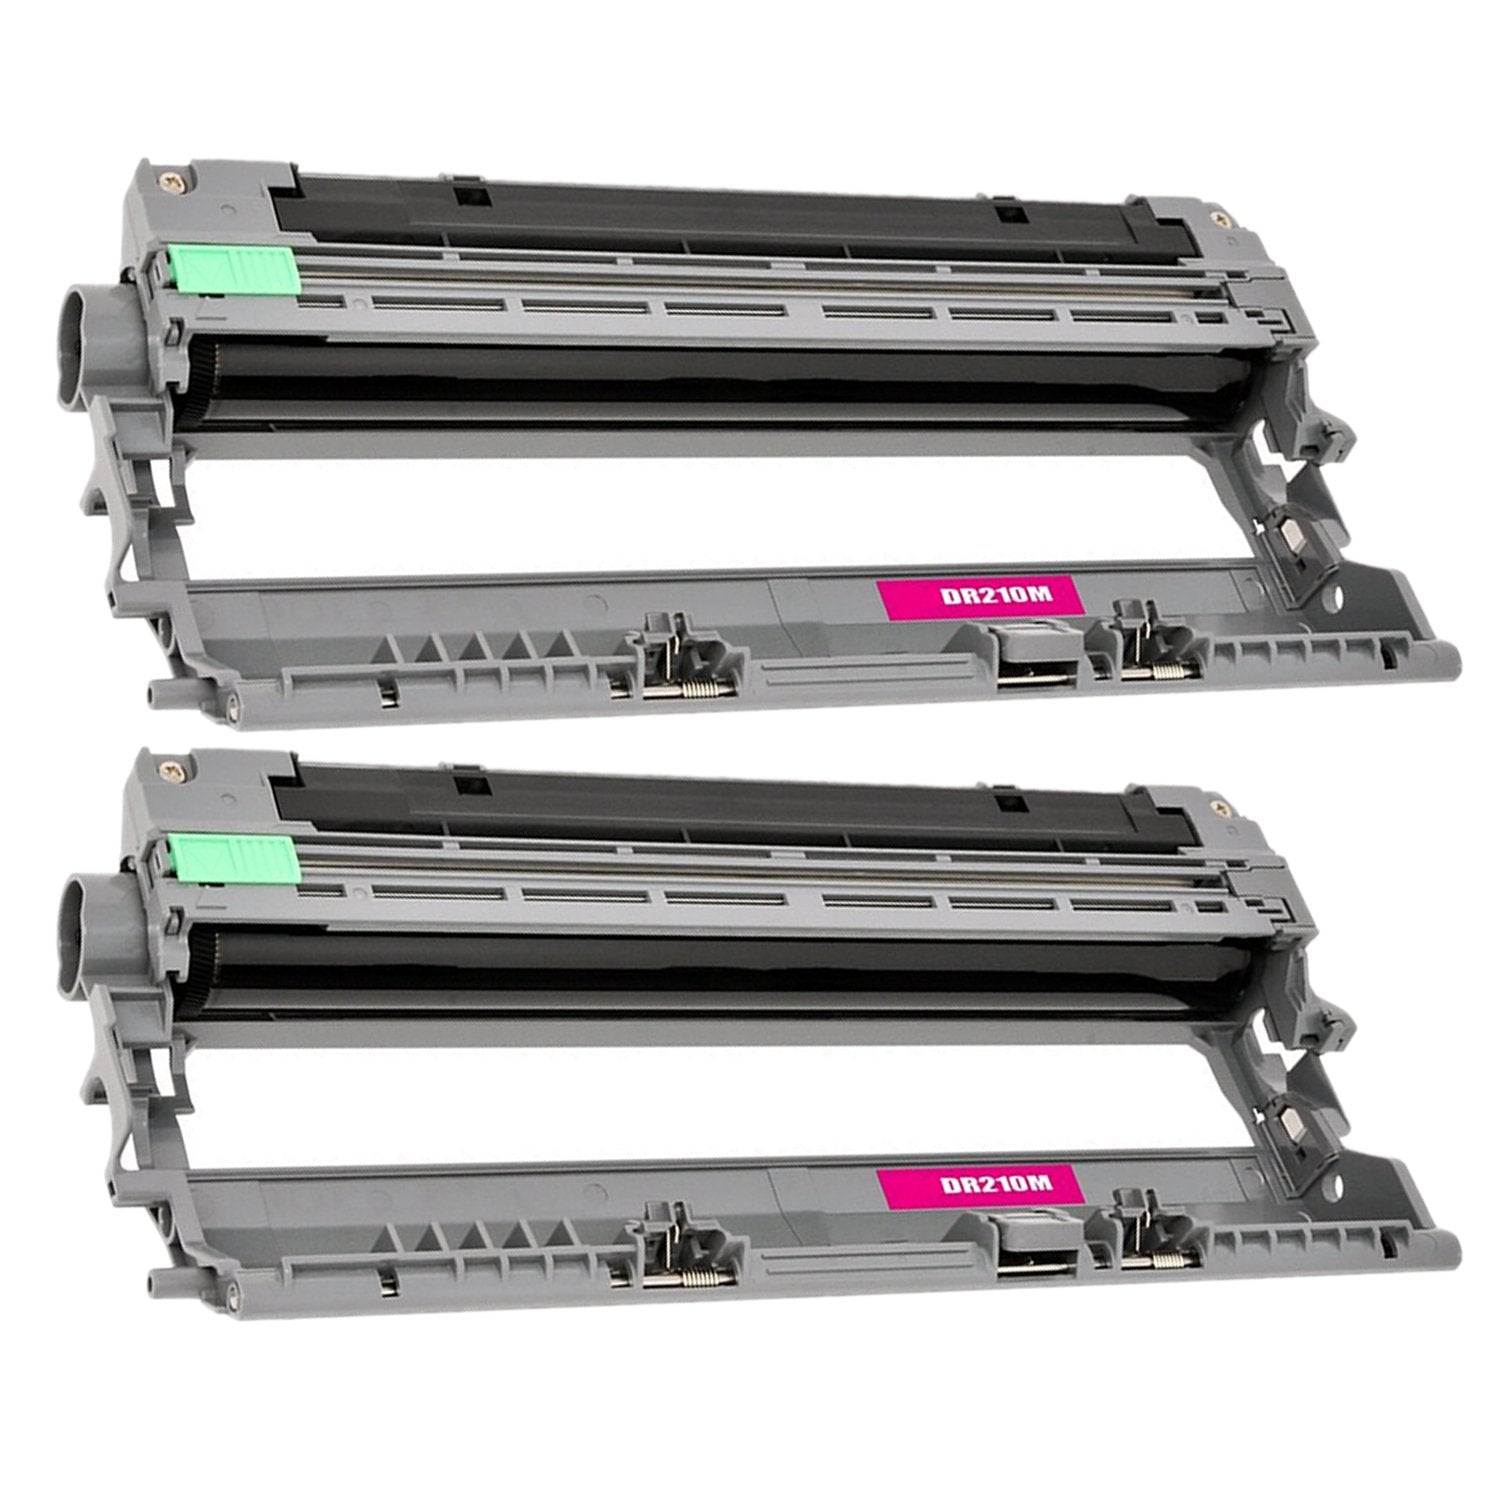 Absolute Toner Compatible Brother DR210 Magenta Drum Unit Toner Cartridge | Absolute Toner Brother Toner Cartridges